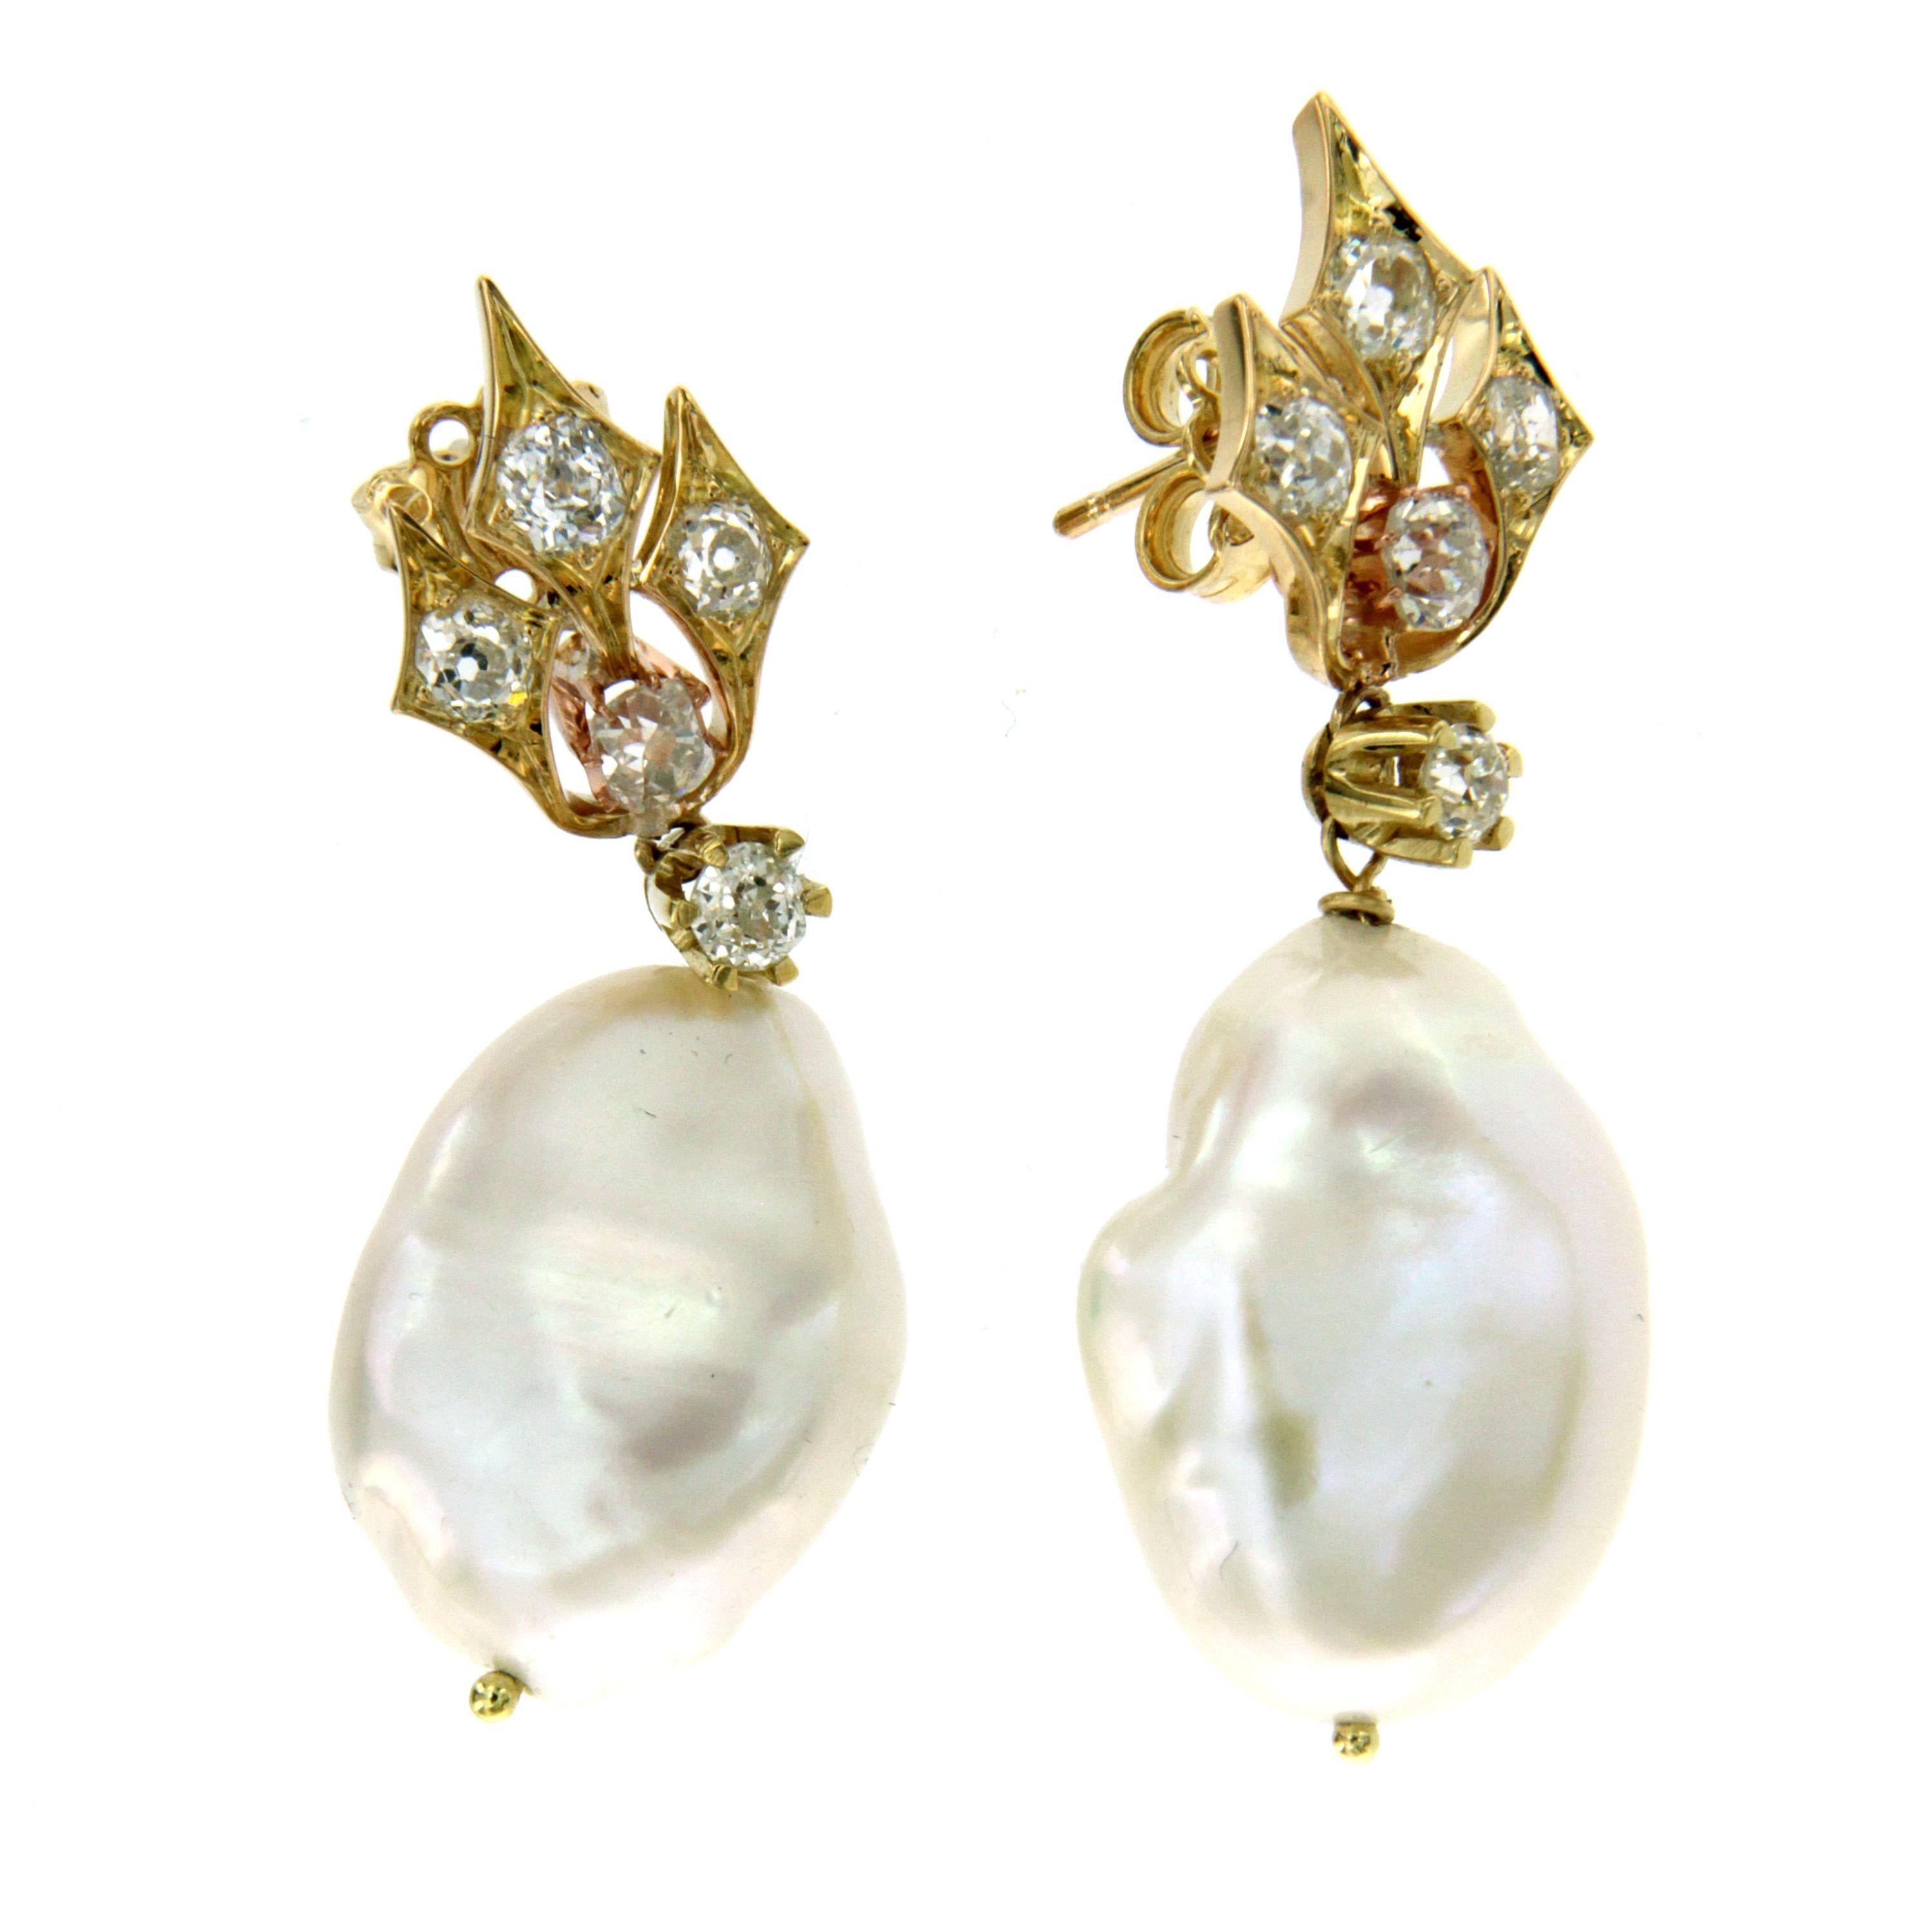 Stunning Earrings mounted in 18k yellow gold and set with 2 south sea pearls and 1.60 ct european cut Diamonds graded G color Vs. Circa 1980

Condition: Pre-Owned - Excellent 
Metal: 18k Yellow Gold 
Gem stone: South sea Pearls - Diamonds
Measures: